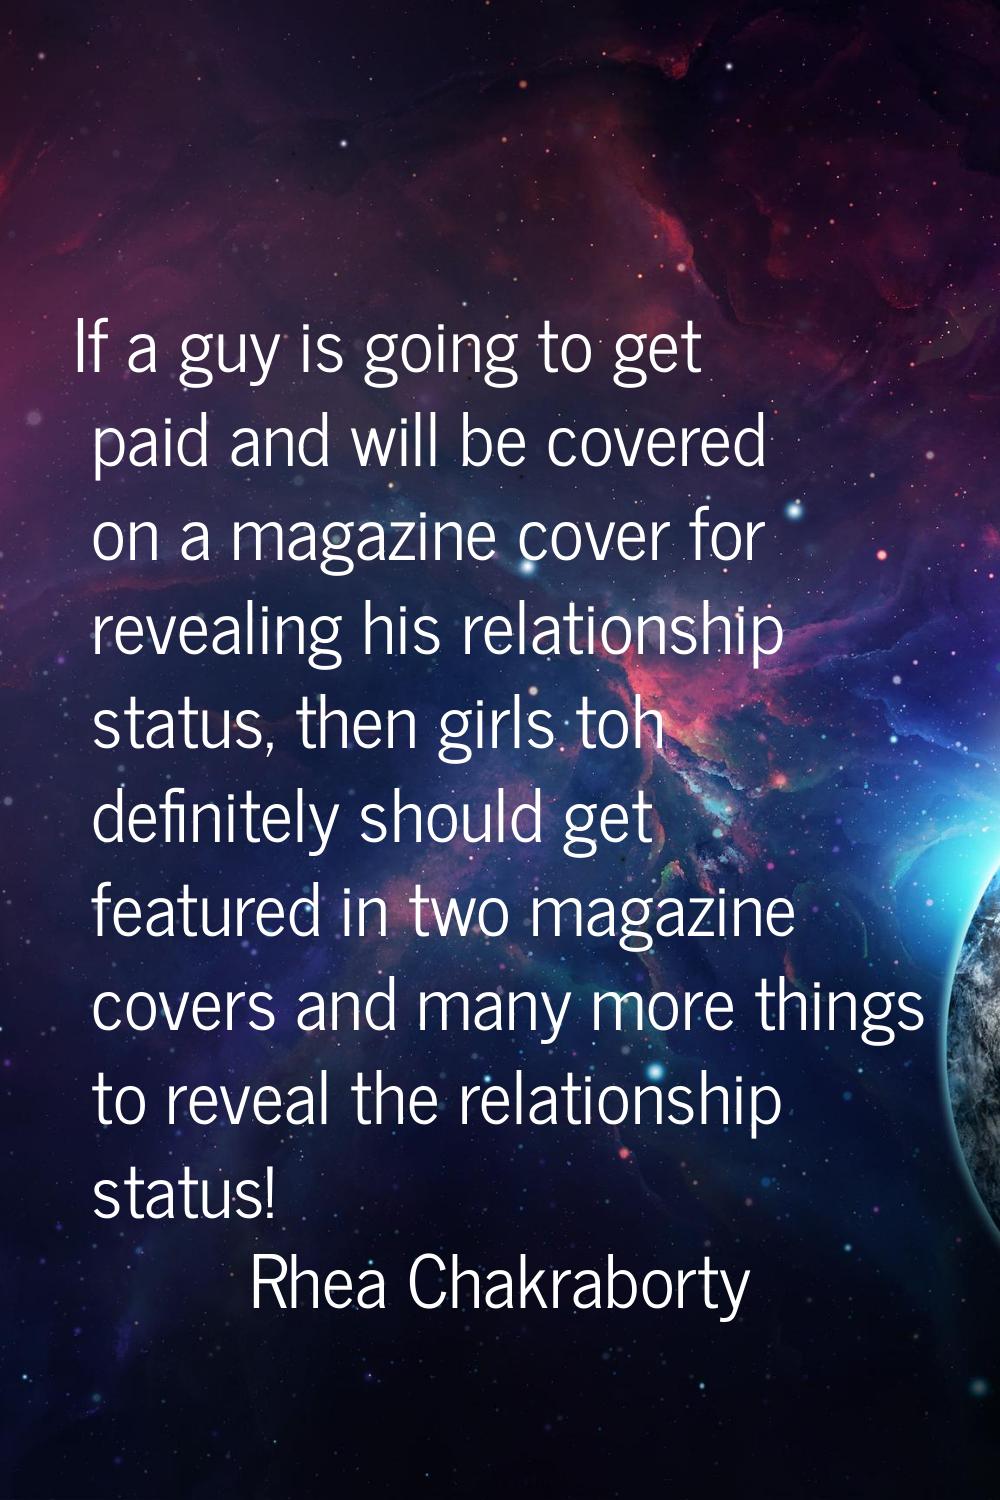 If a guy is going to get paid and will be covered on a magazine cover for revealing his relationshi